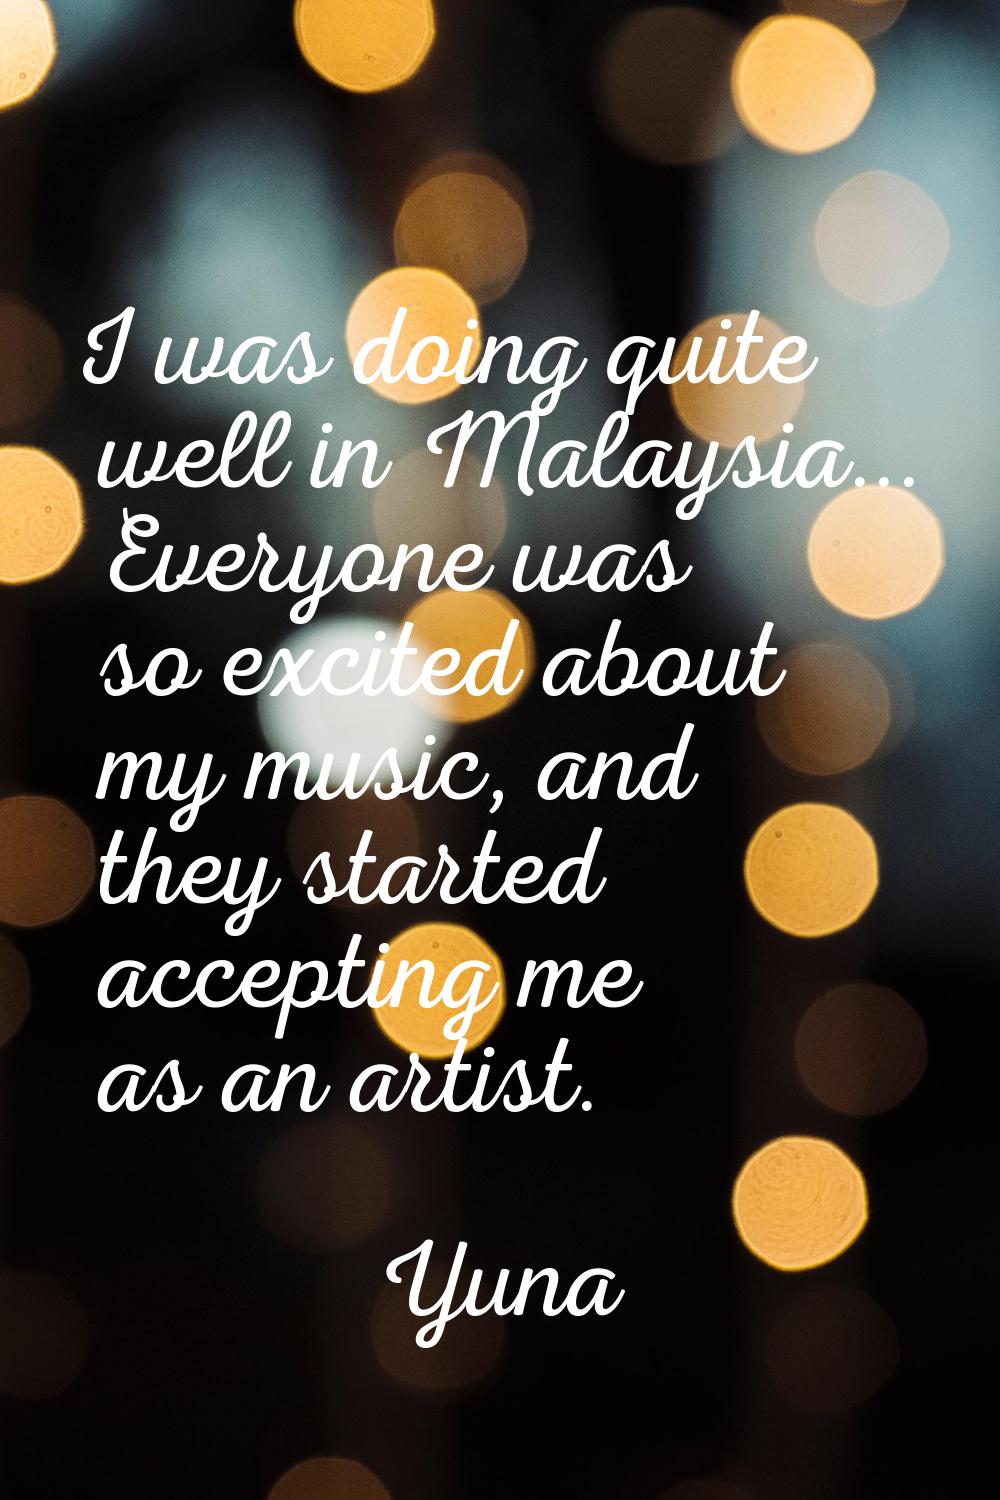 I was doing quite well in Malaysia... Everyone was so excited about my music, and they started acce